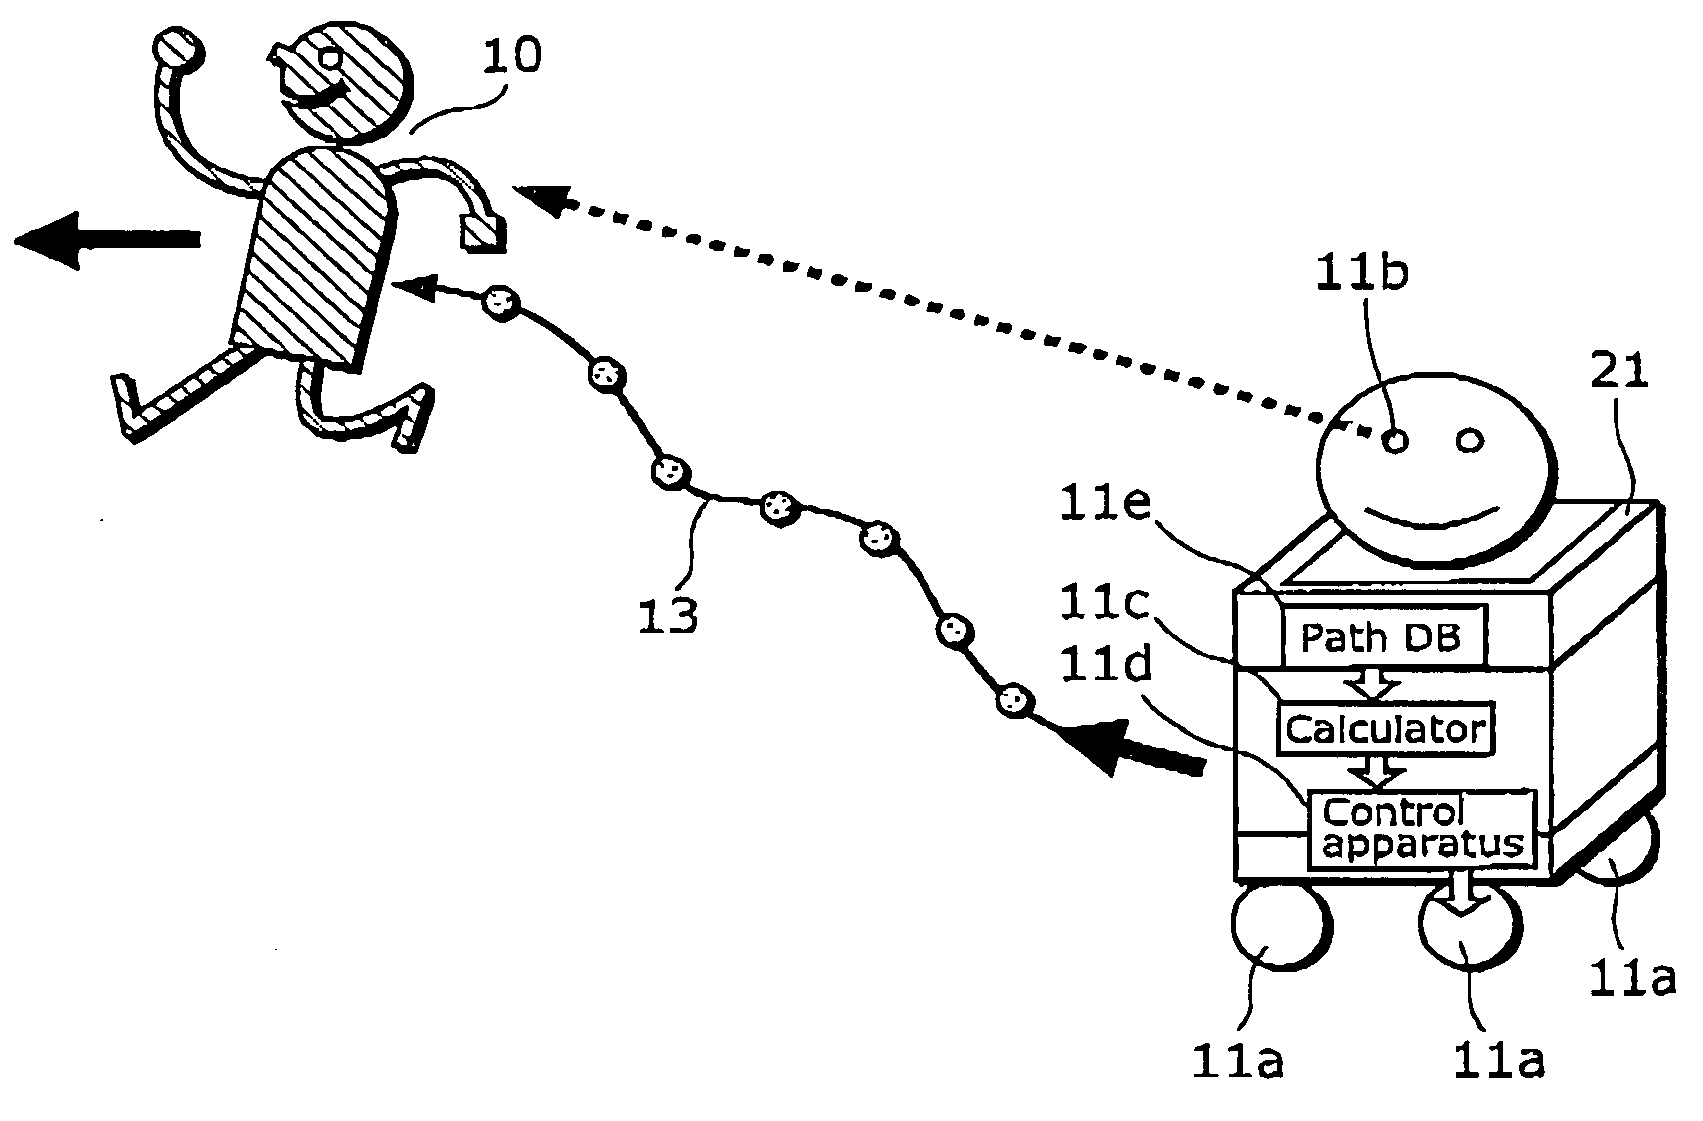 Method of controlling movement of mobile robot